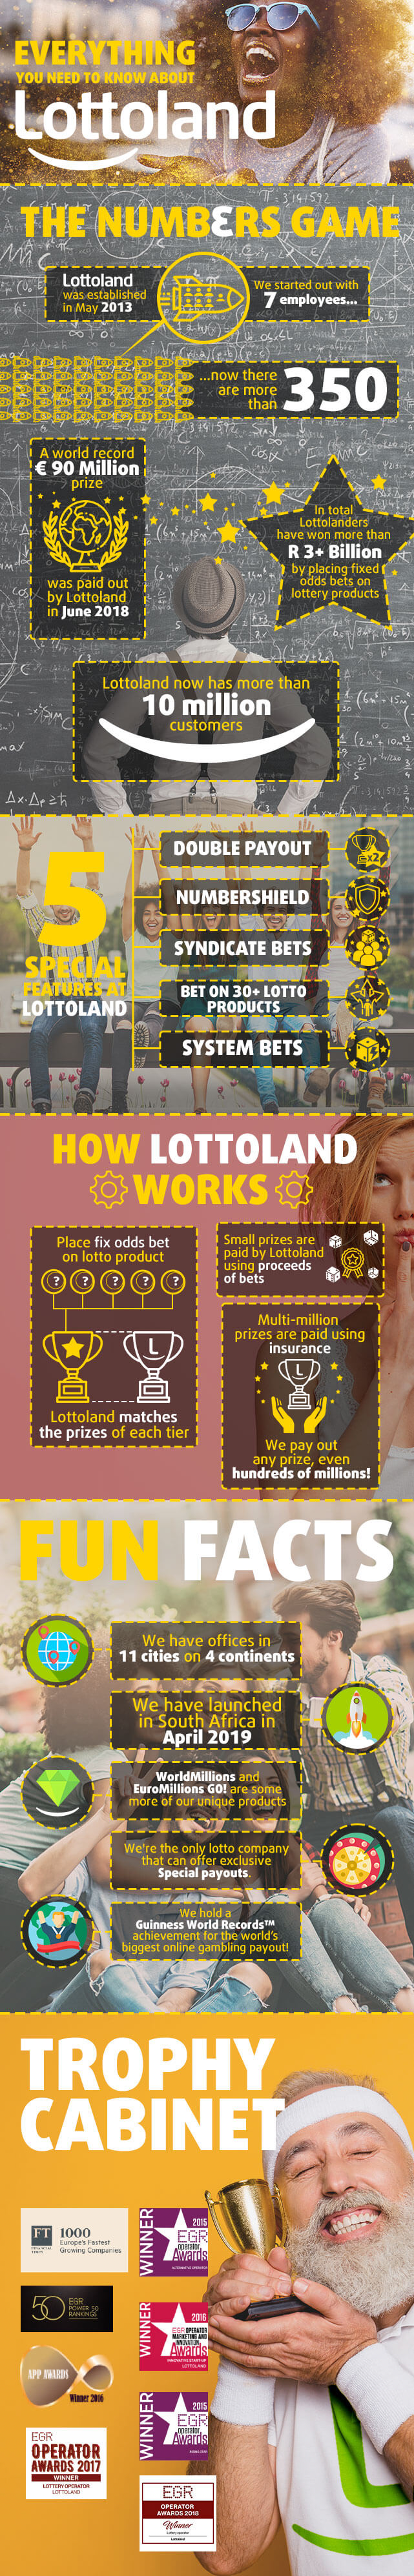 10 Million Customers Worldwide Choose Lottoland - Here is Why!